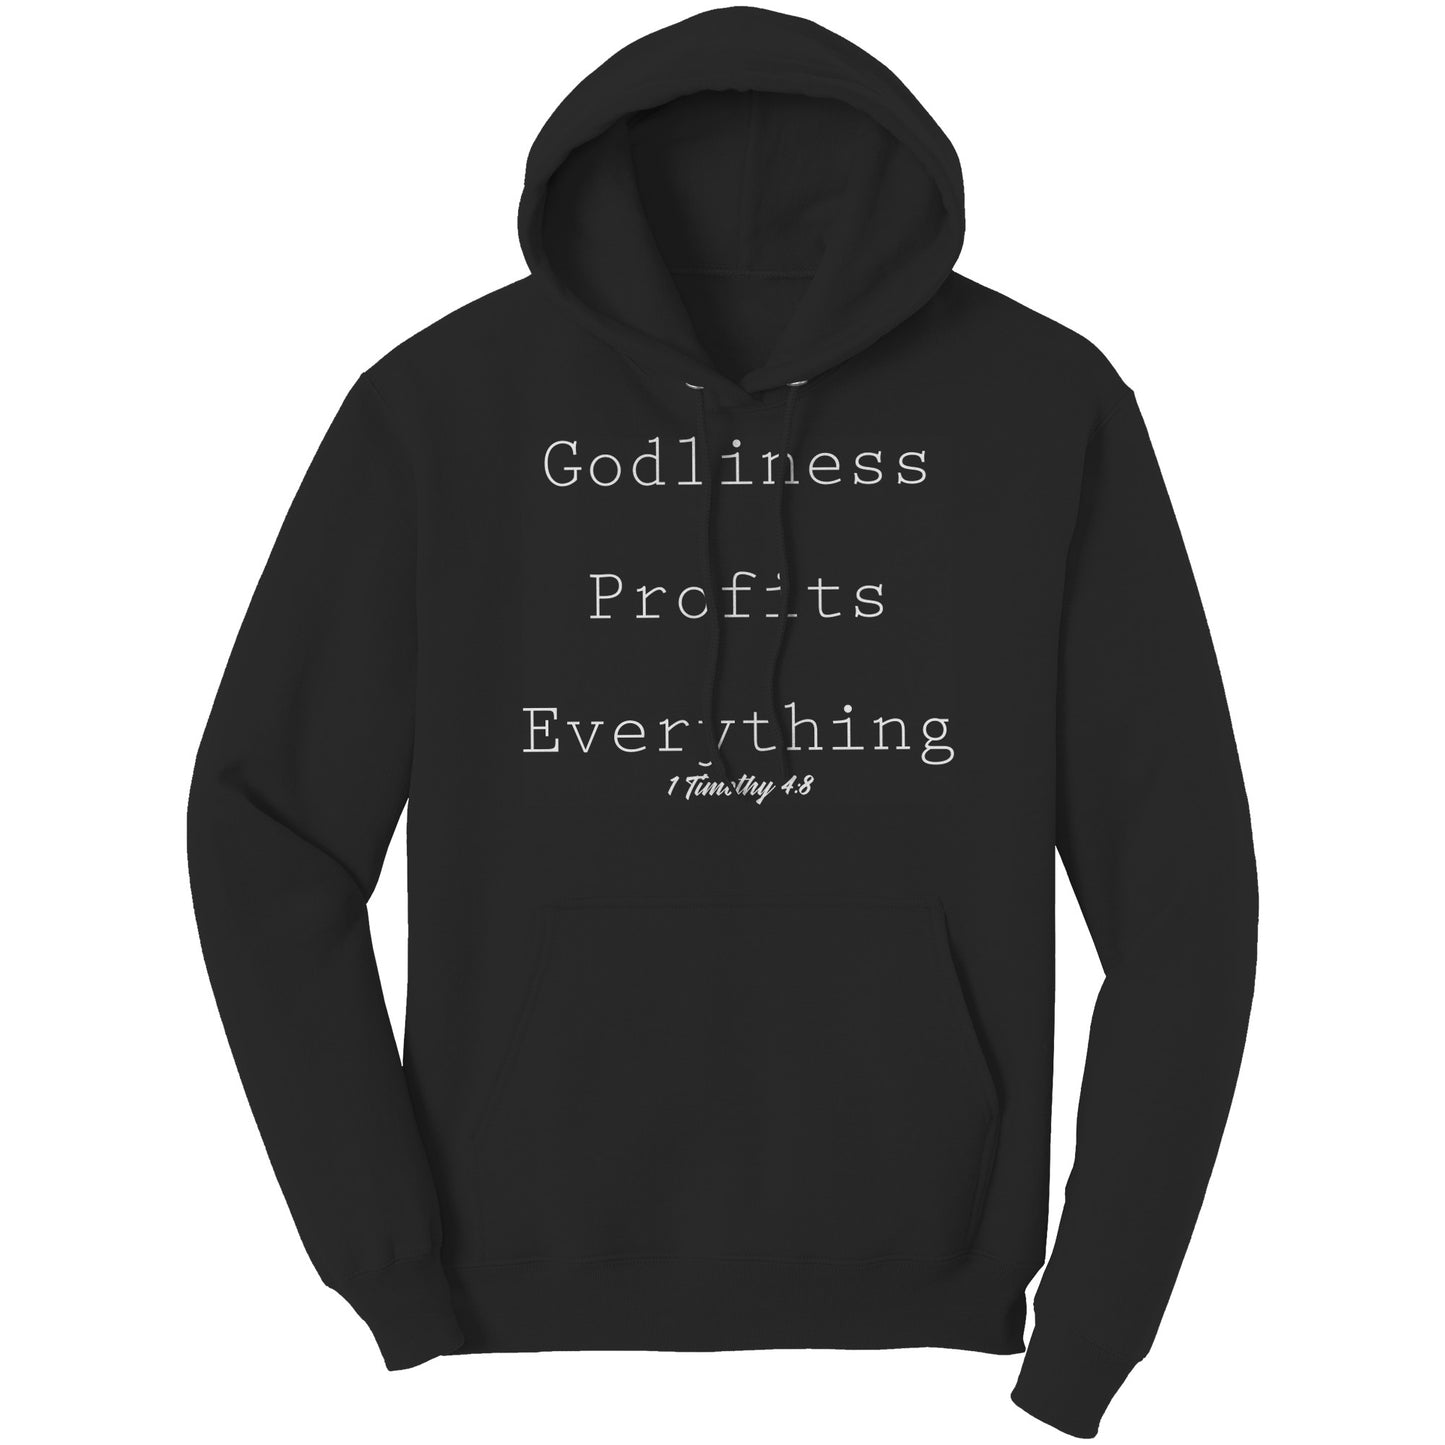 Godliness Profits Everything 1 Timothy 4:8 Hoodie Part 2